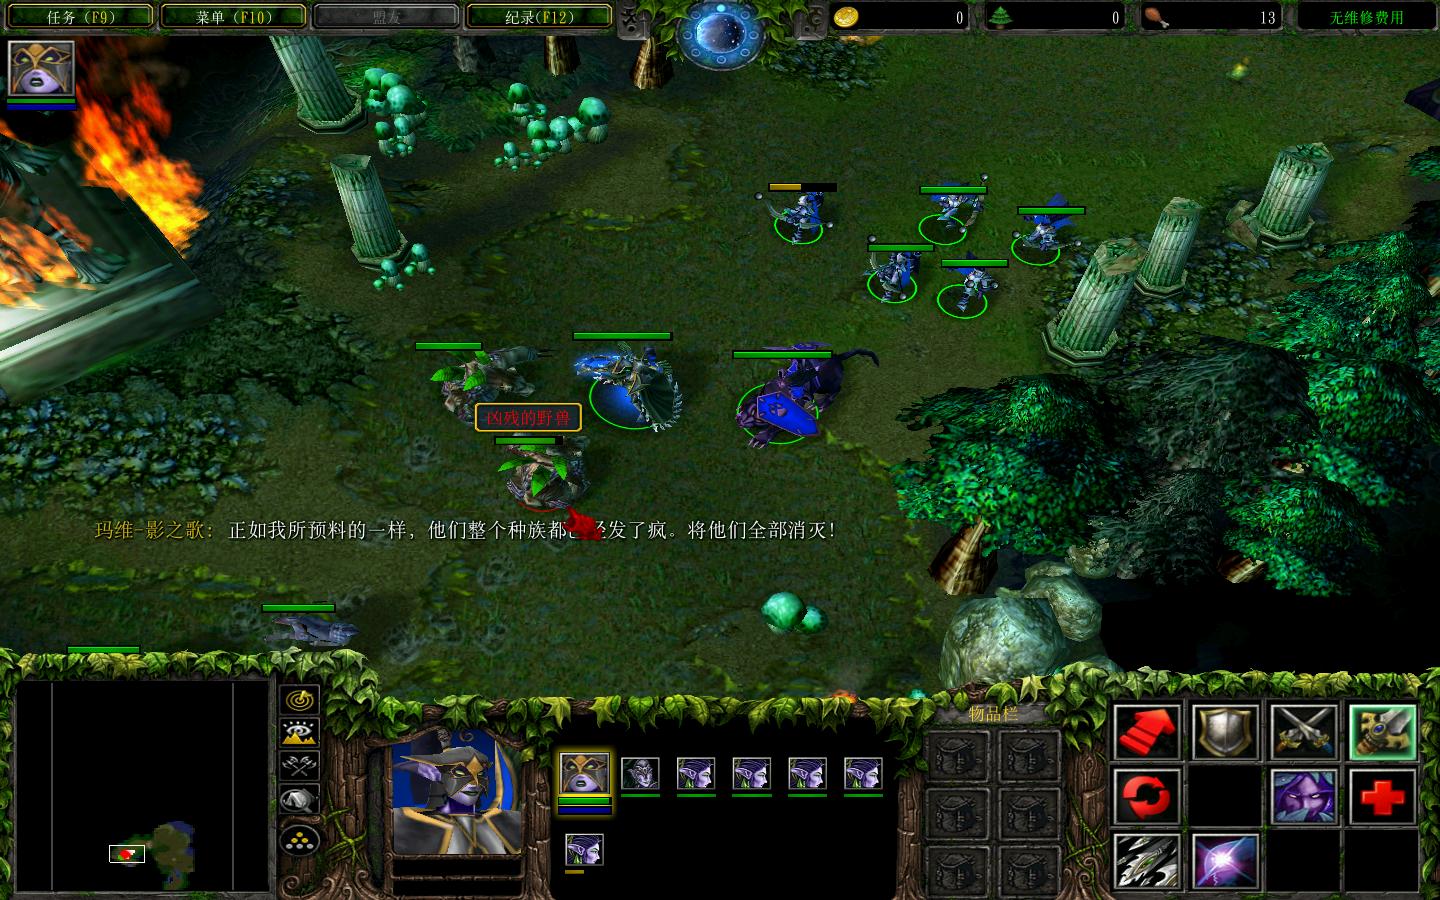 ħ3Warcraft III The Frozen Thronev1.24߶.v1.4